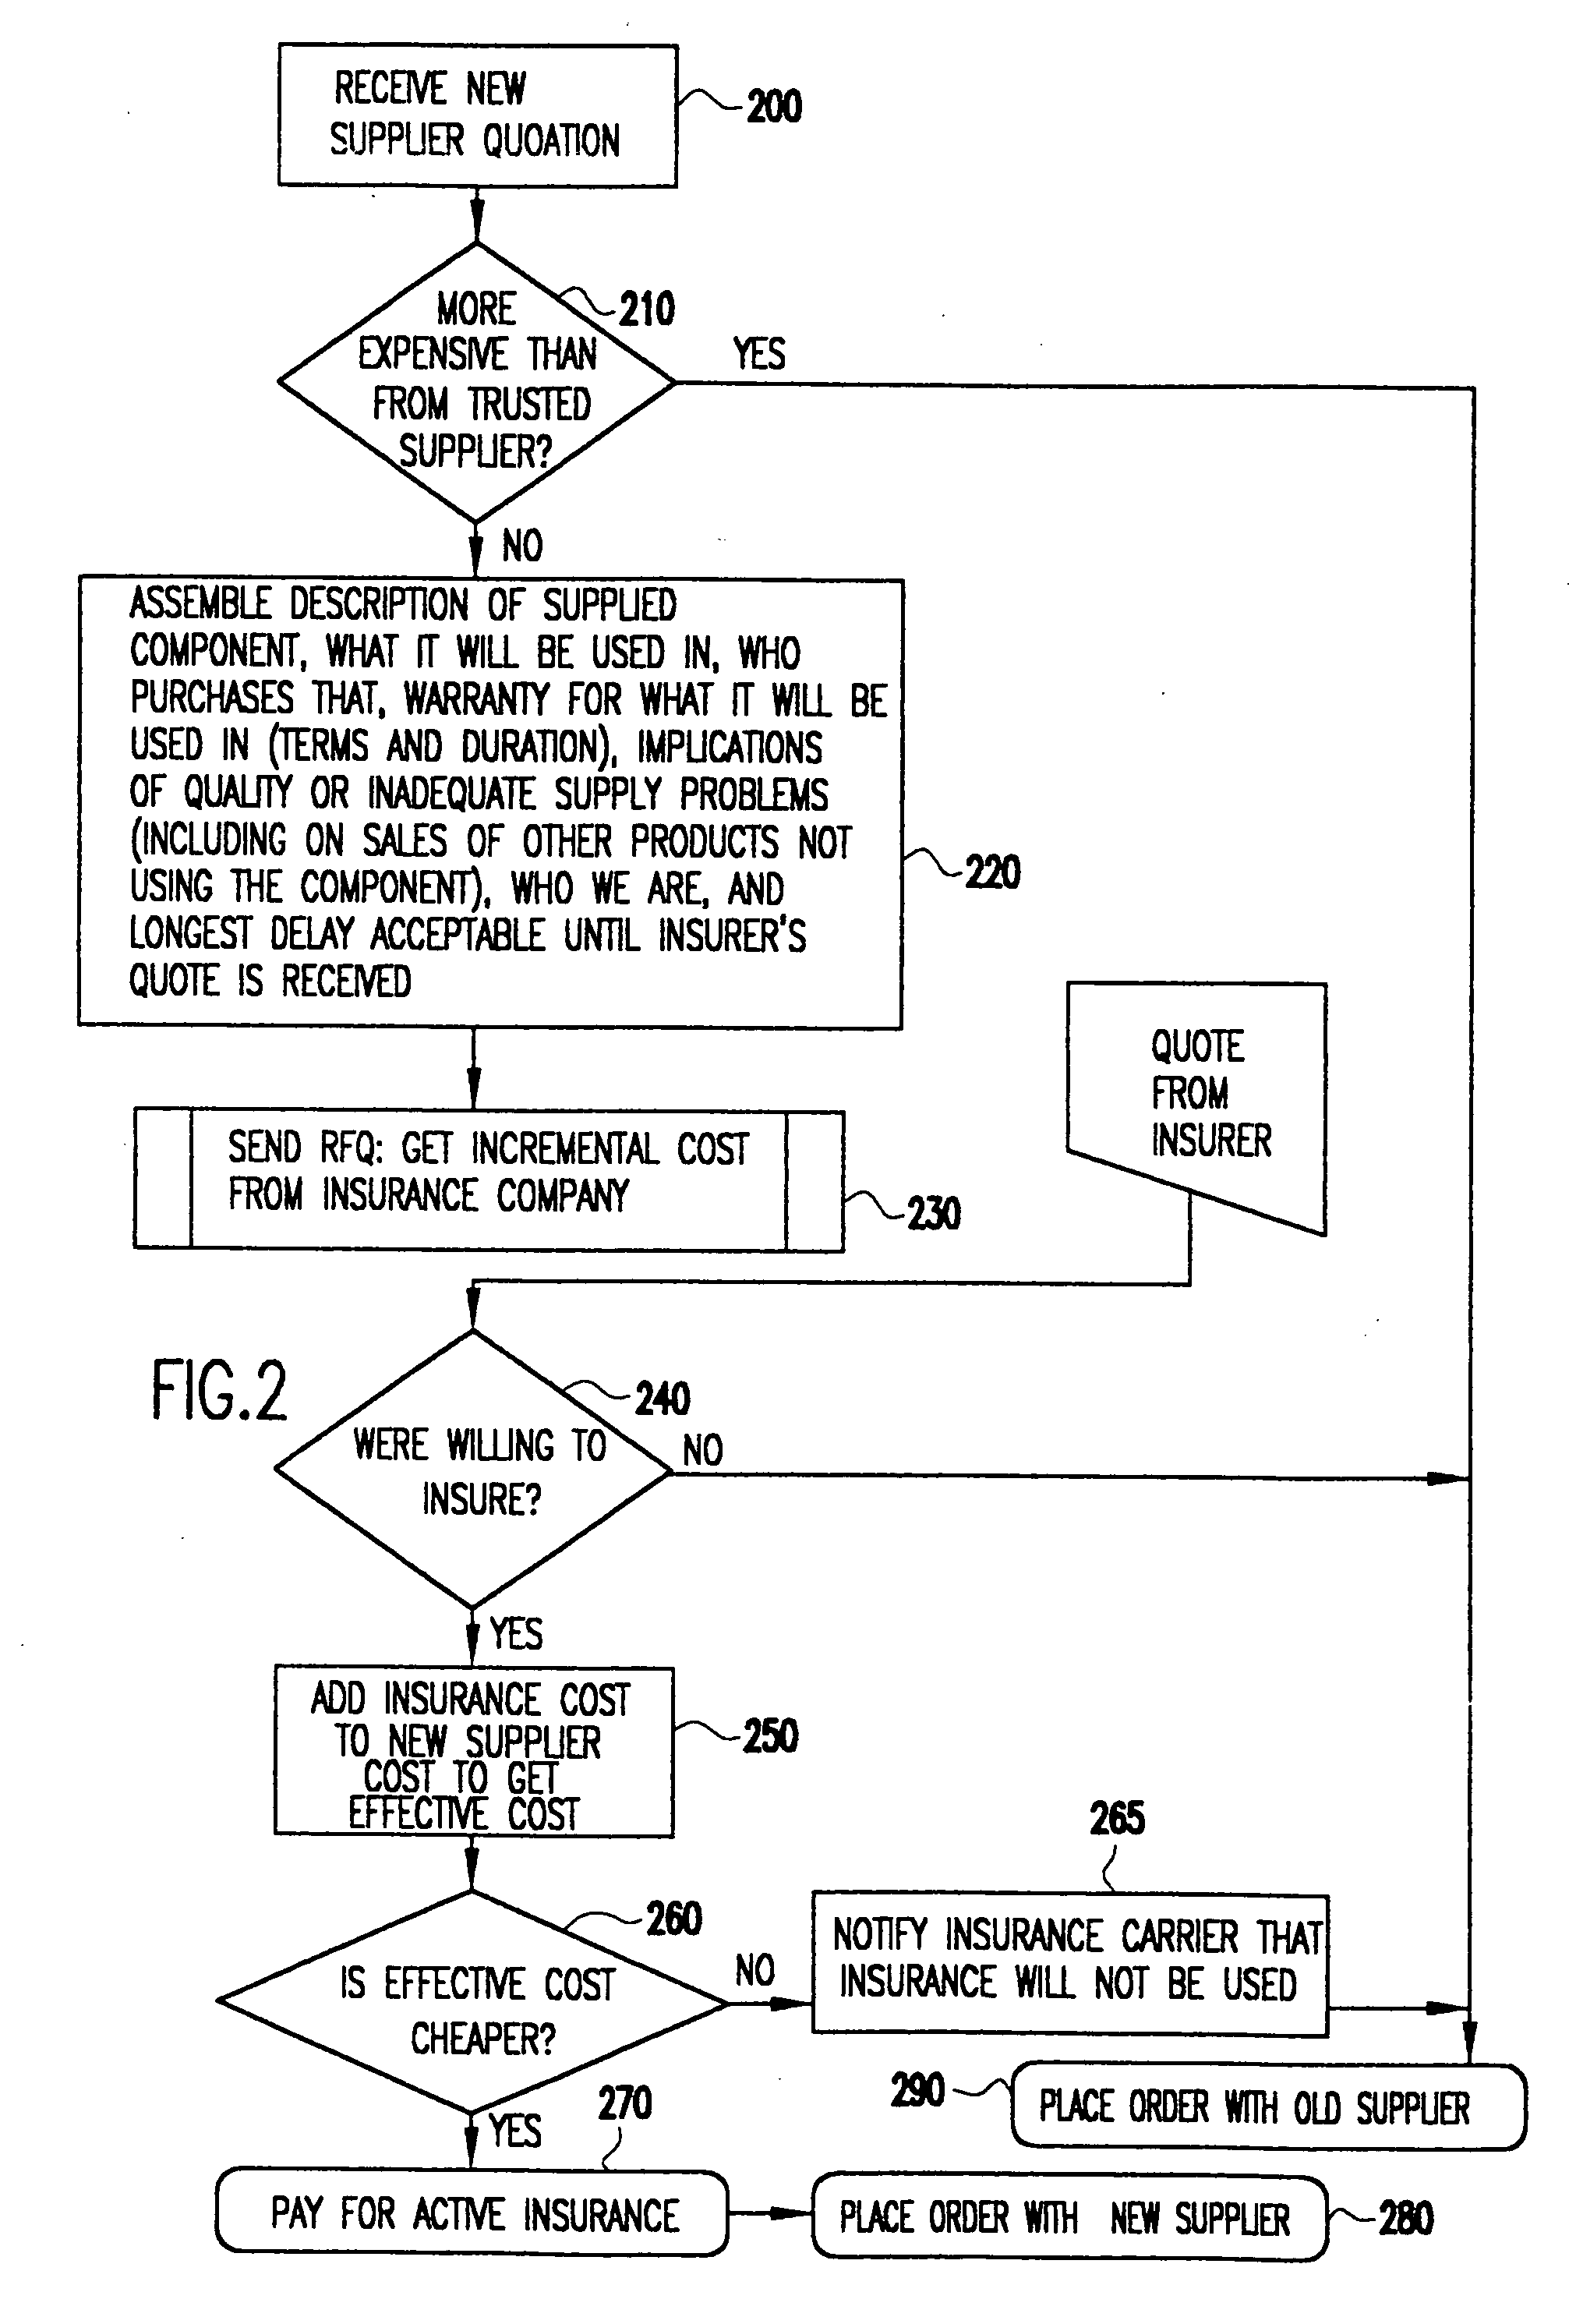 System and method for assisting a buyer in selecting a supplier of goods or services